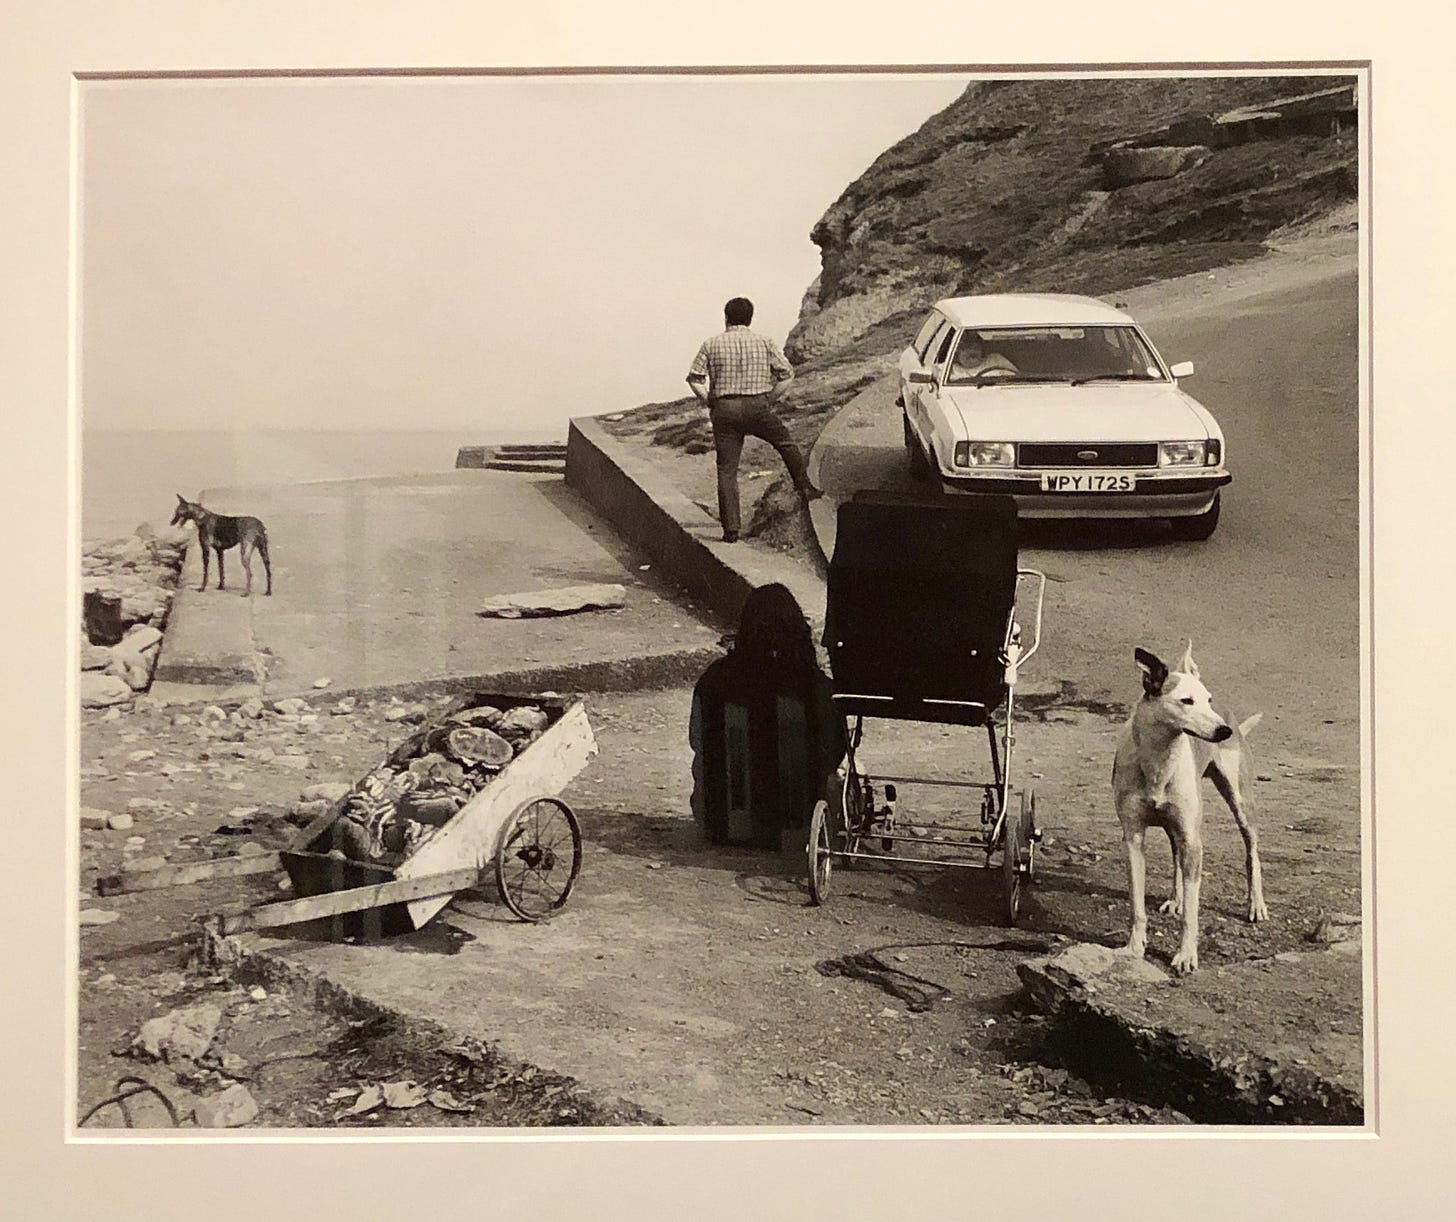 A barrow of crabs, seated figure facing away from the viewer, pram, and dog take up the foreground of a rocky beach. In the background, a man and a dog stare at the ocean near a car and a cliff, looking away from the viewer.